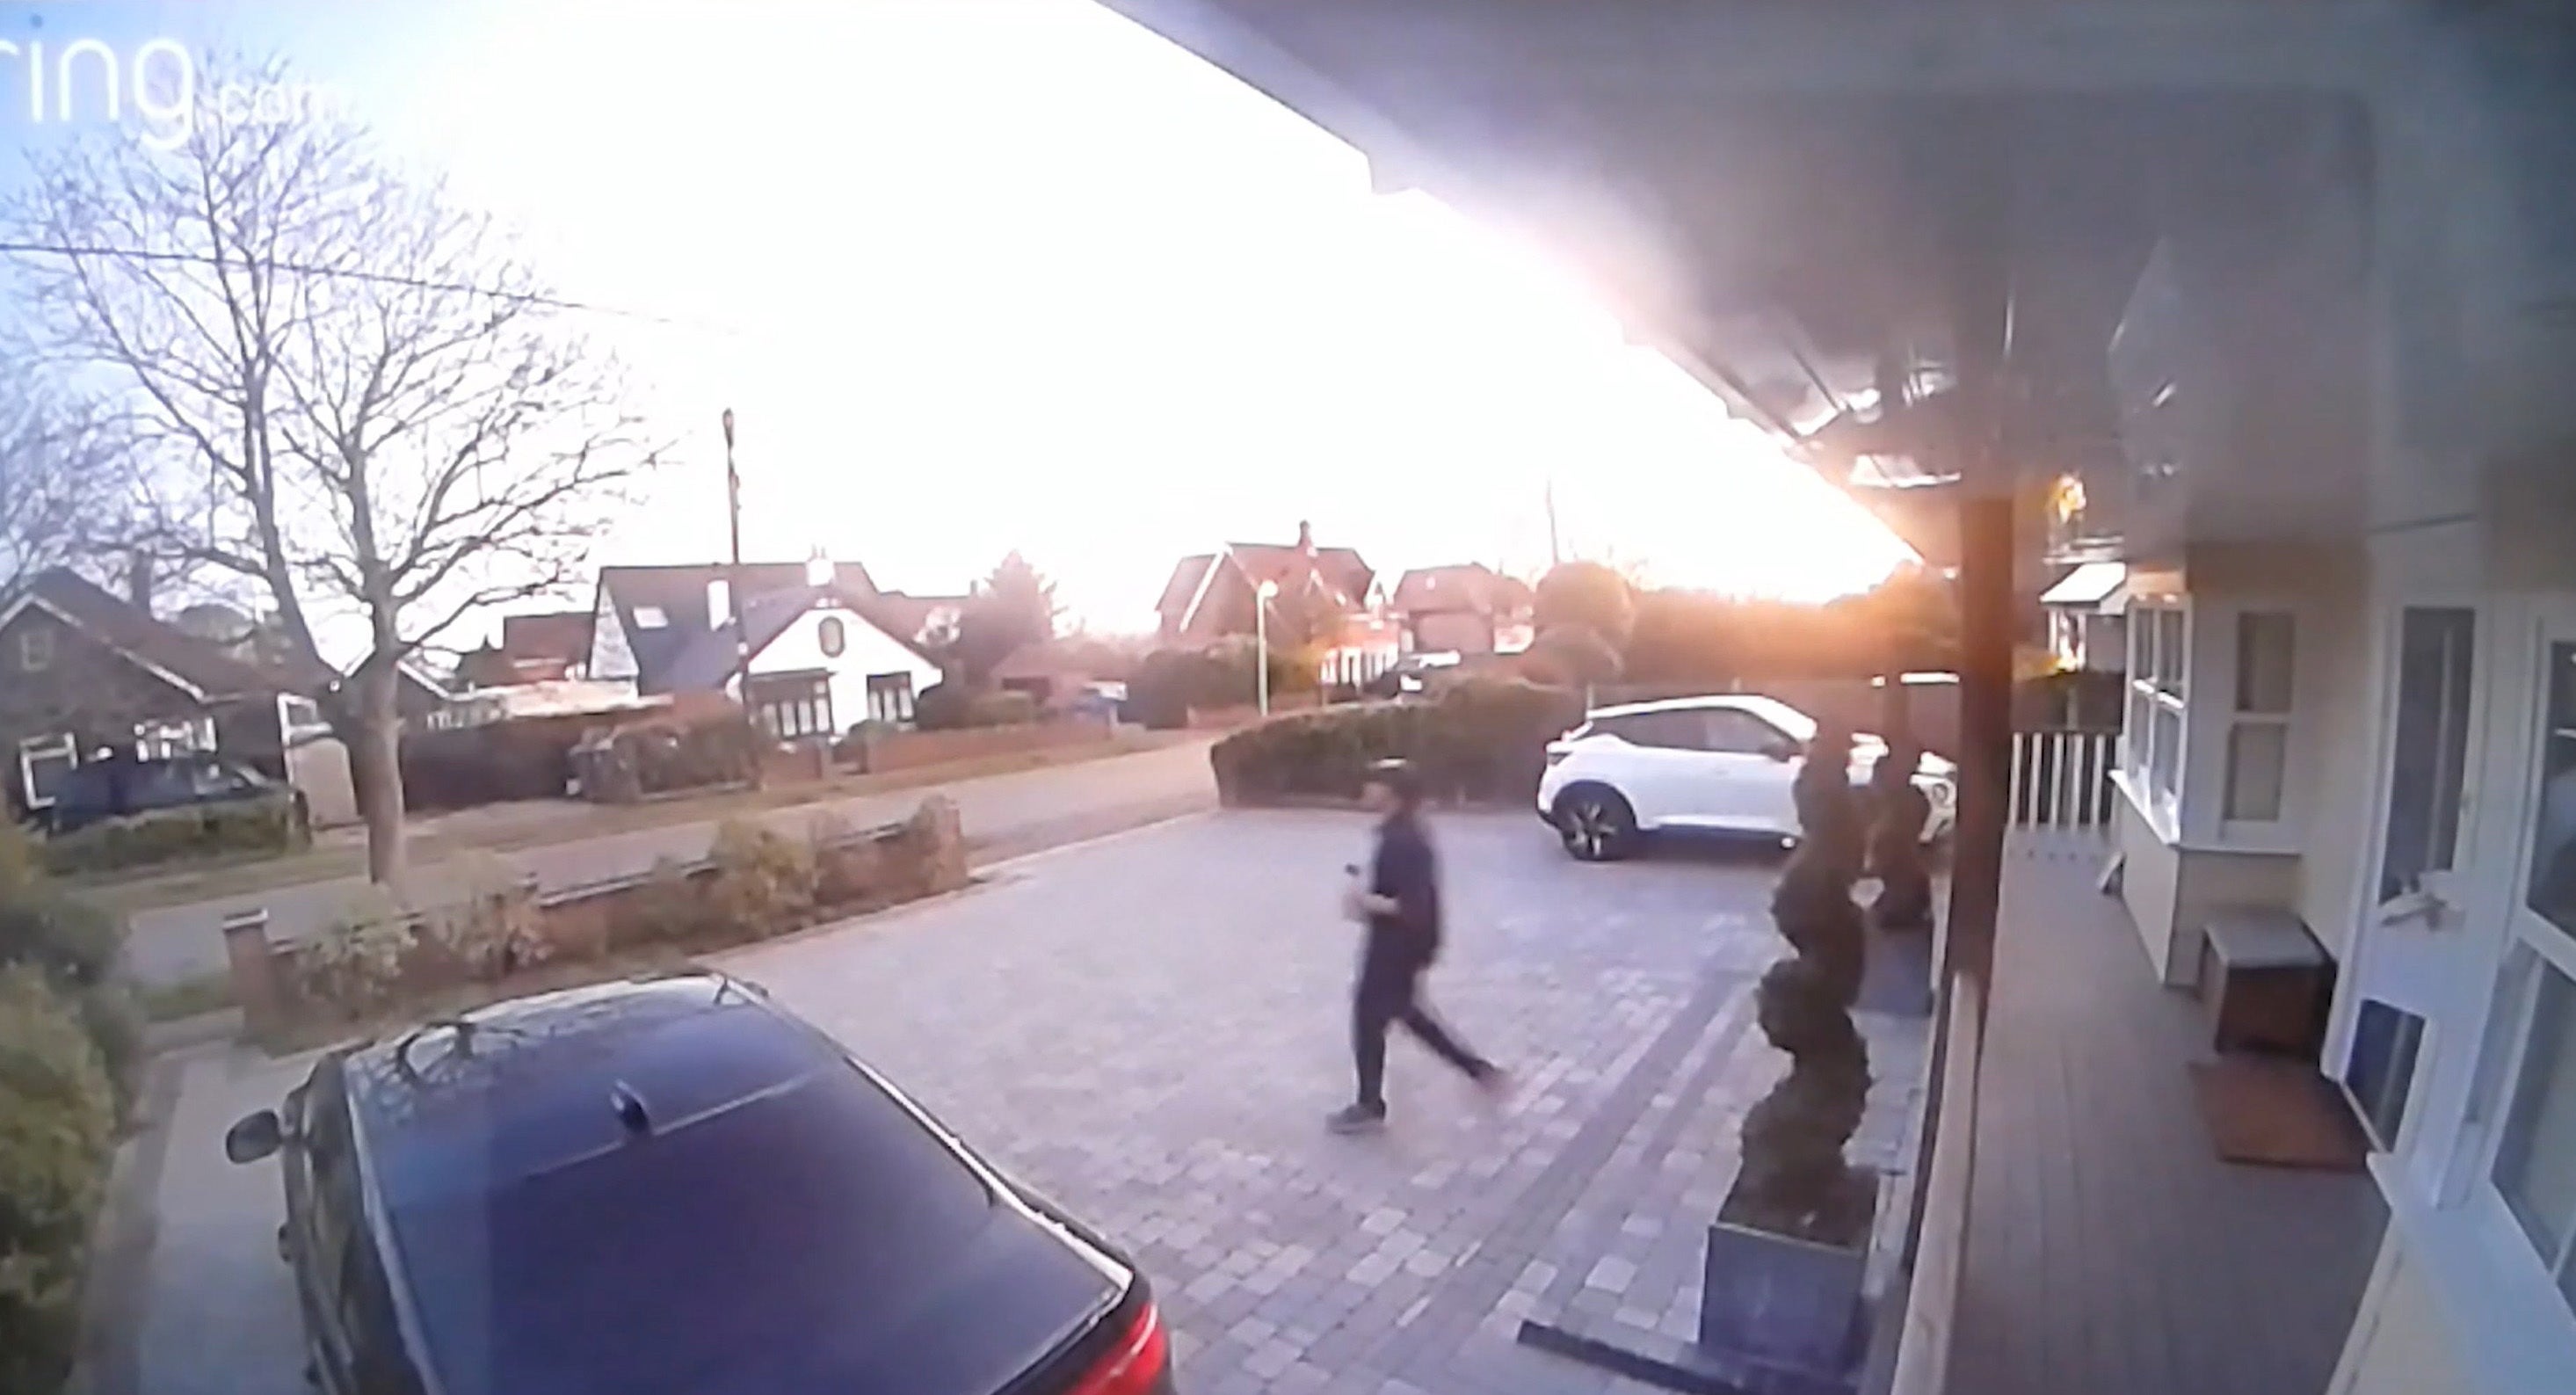 Doorbell footage showing D’Wit leaving their home on 7 April